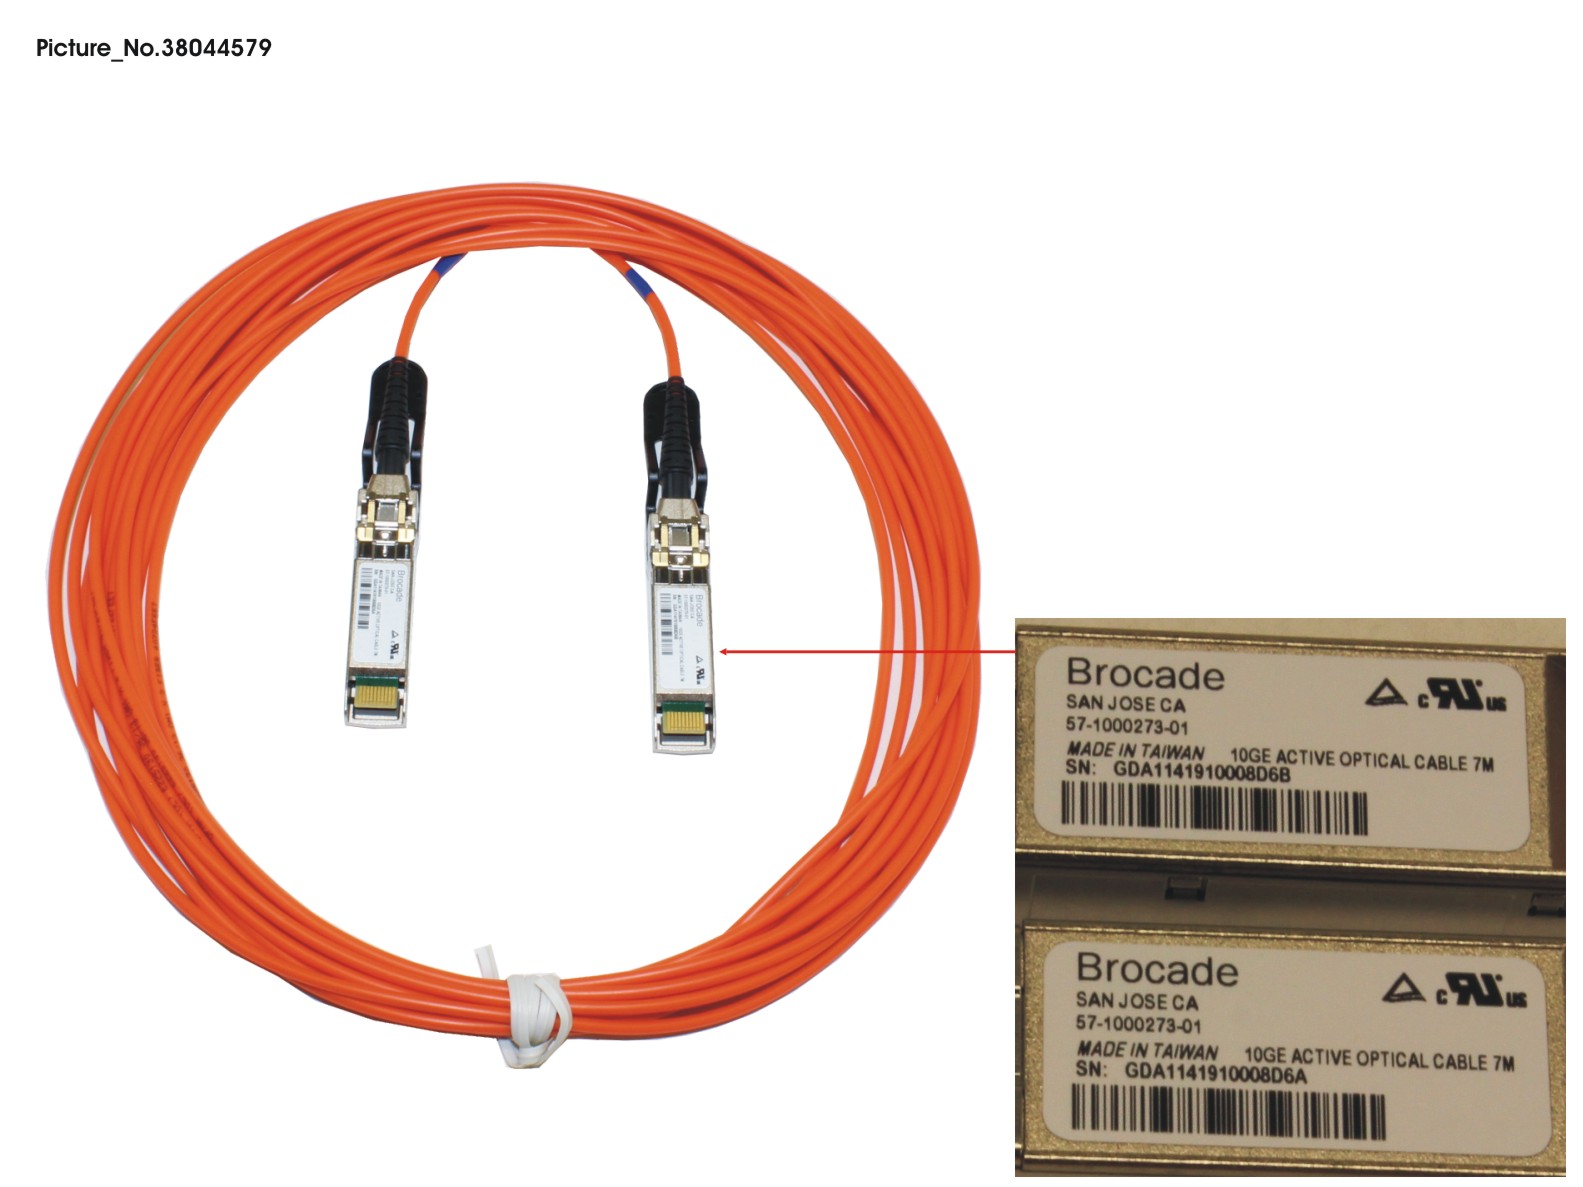 SFP+ ACTIVE OPTICAL CABLE BROCADE, 7M